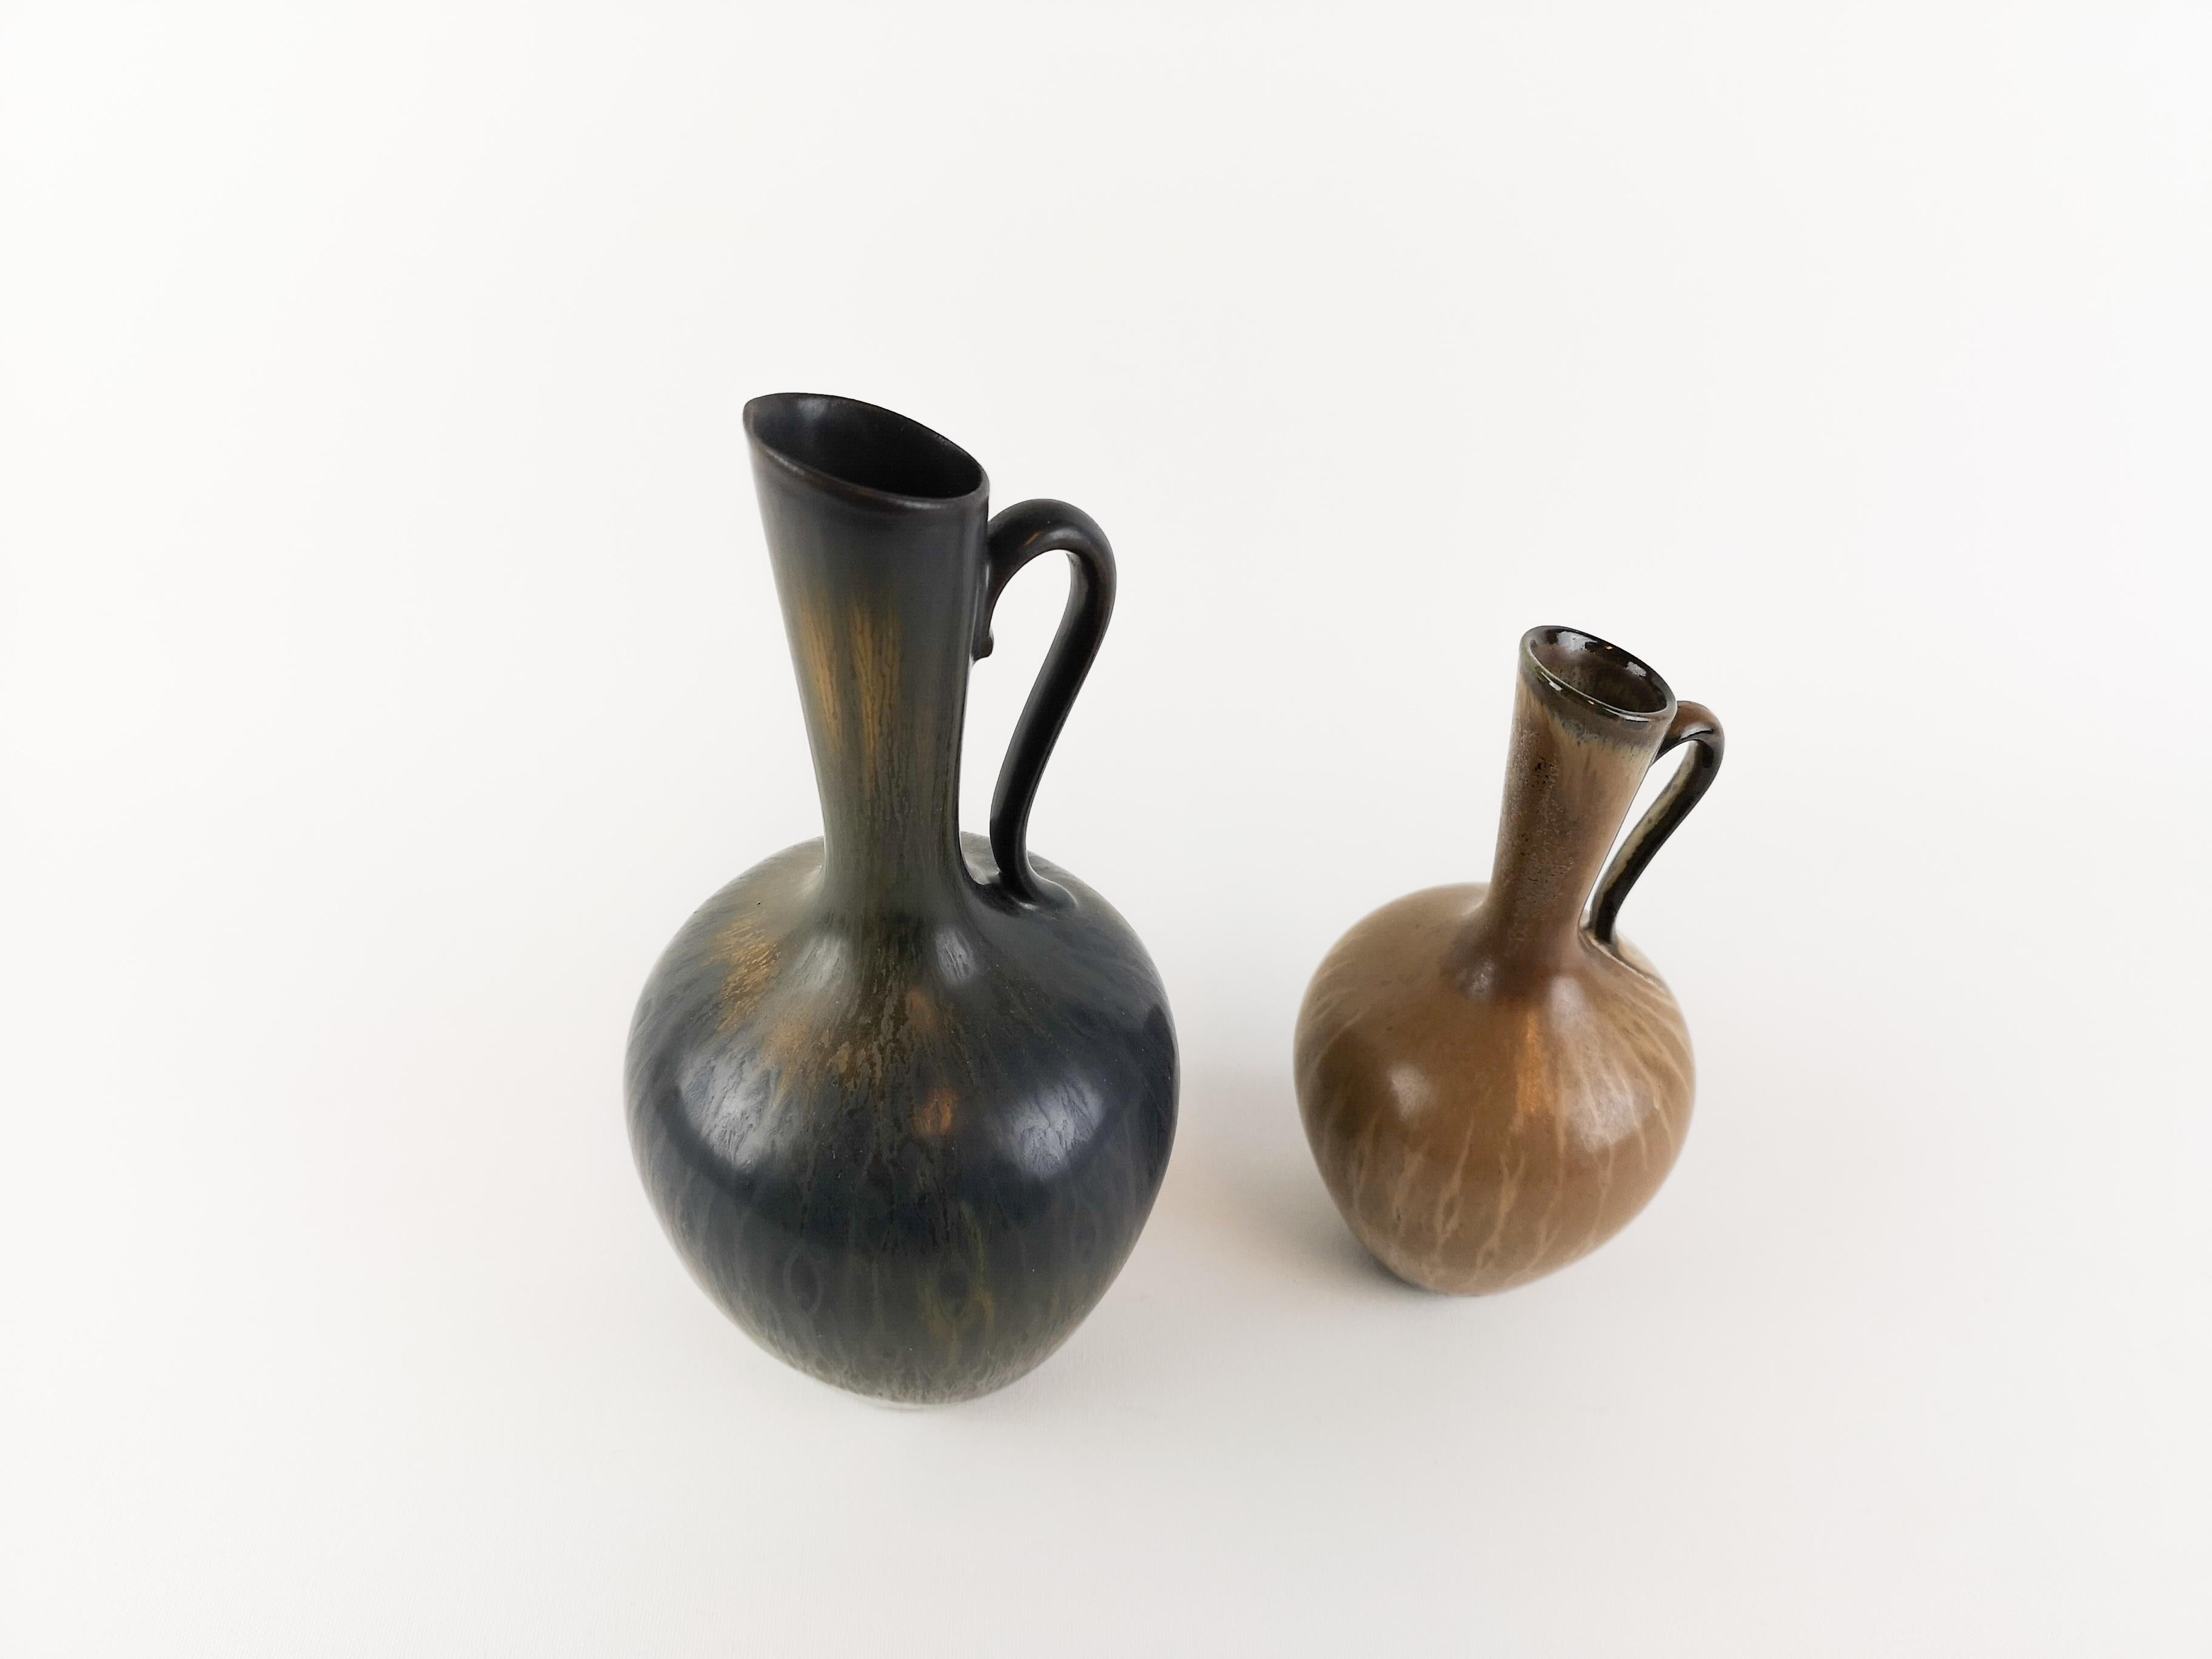 Two wonderful Peacock Vases from Rörstrand and maker/designer Gunnar Nylund. Made in Sweden in the midcentury. Beautiful glazed vases in good condition.

The big one measures H 23 D 10 cm. The small one measures H 17 D8.